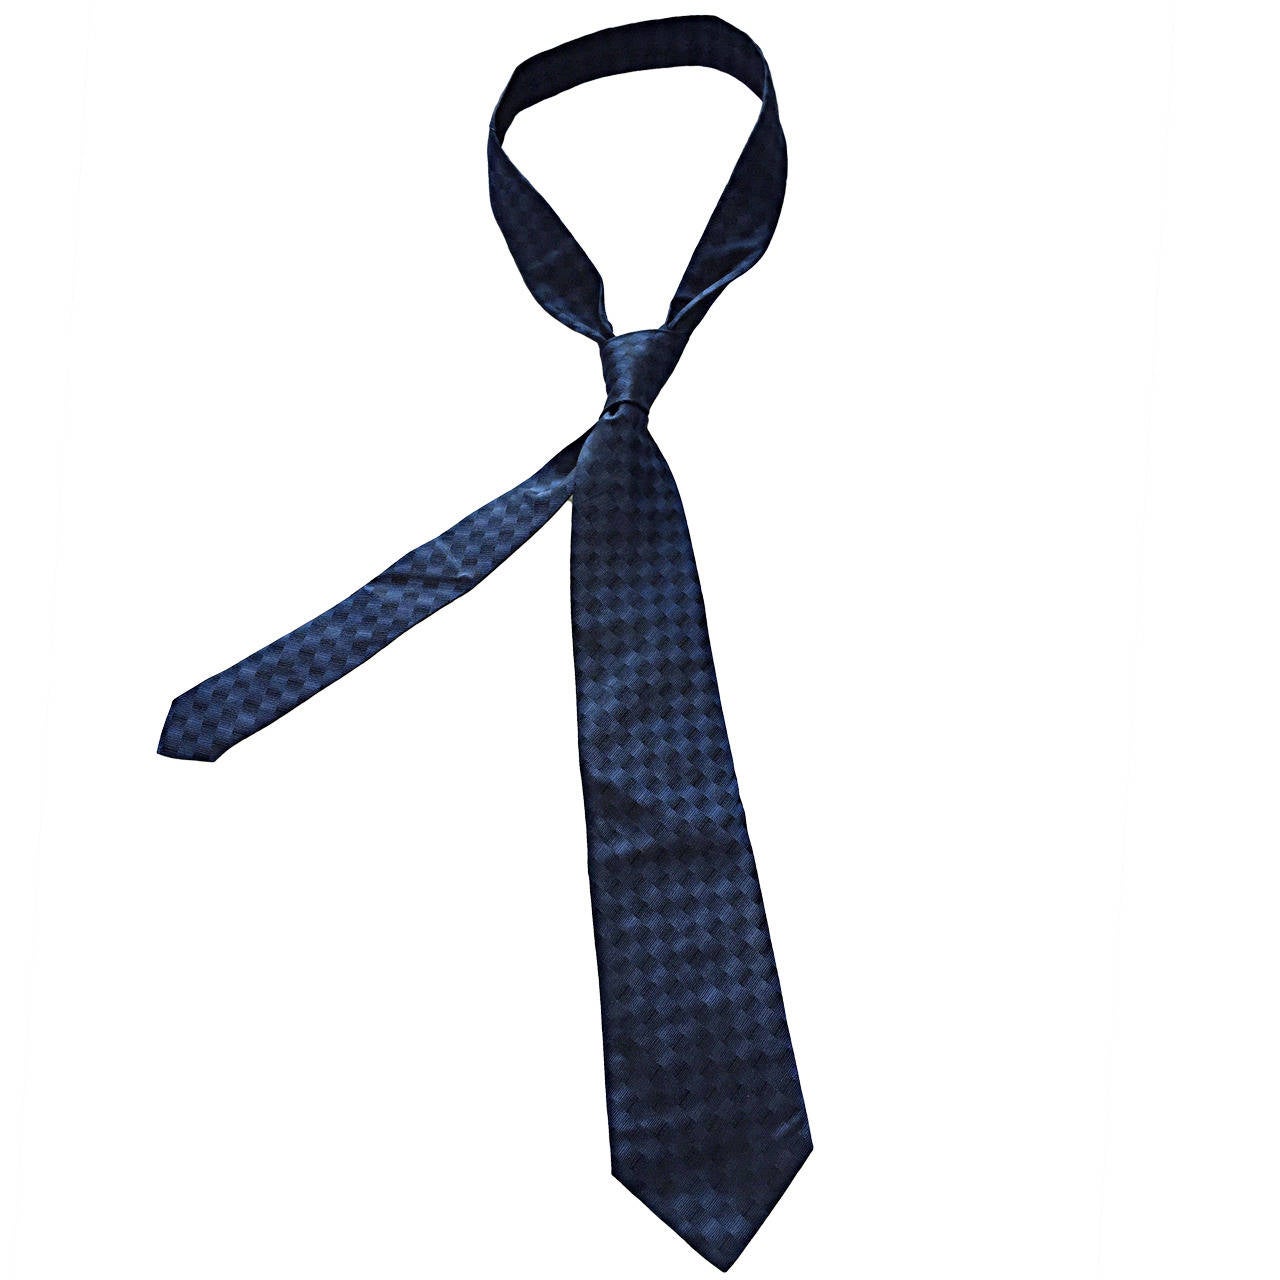 Brand New Givenchy by Ricardo Tisci Navy Blue Tie for Father's Day